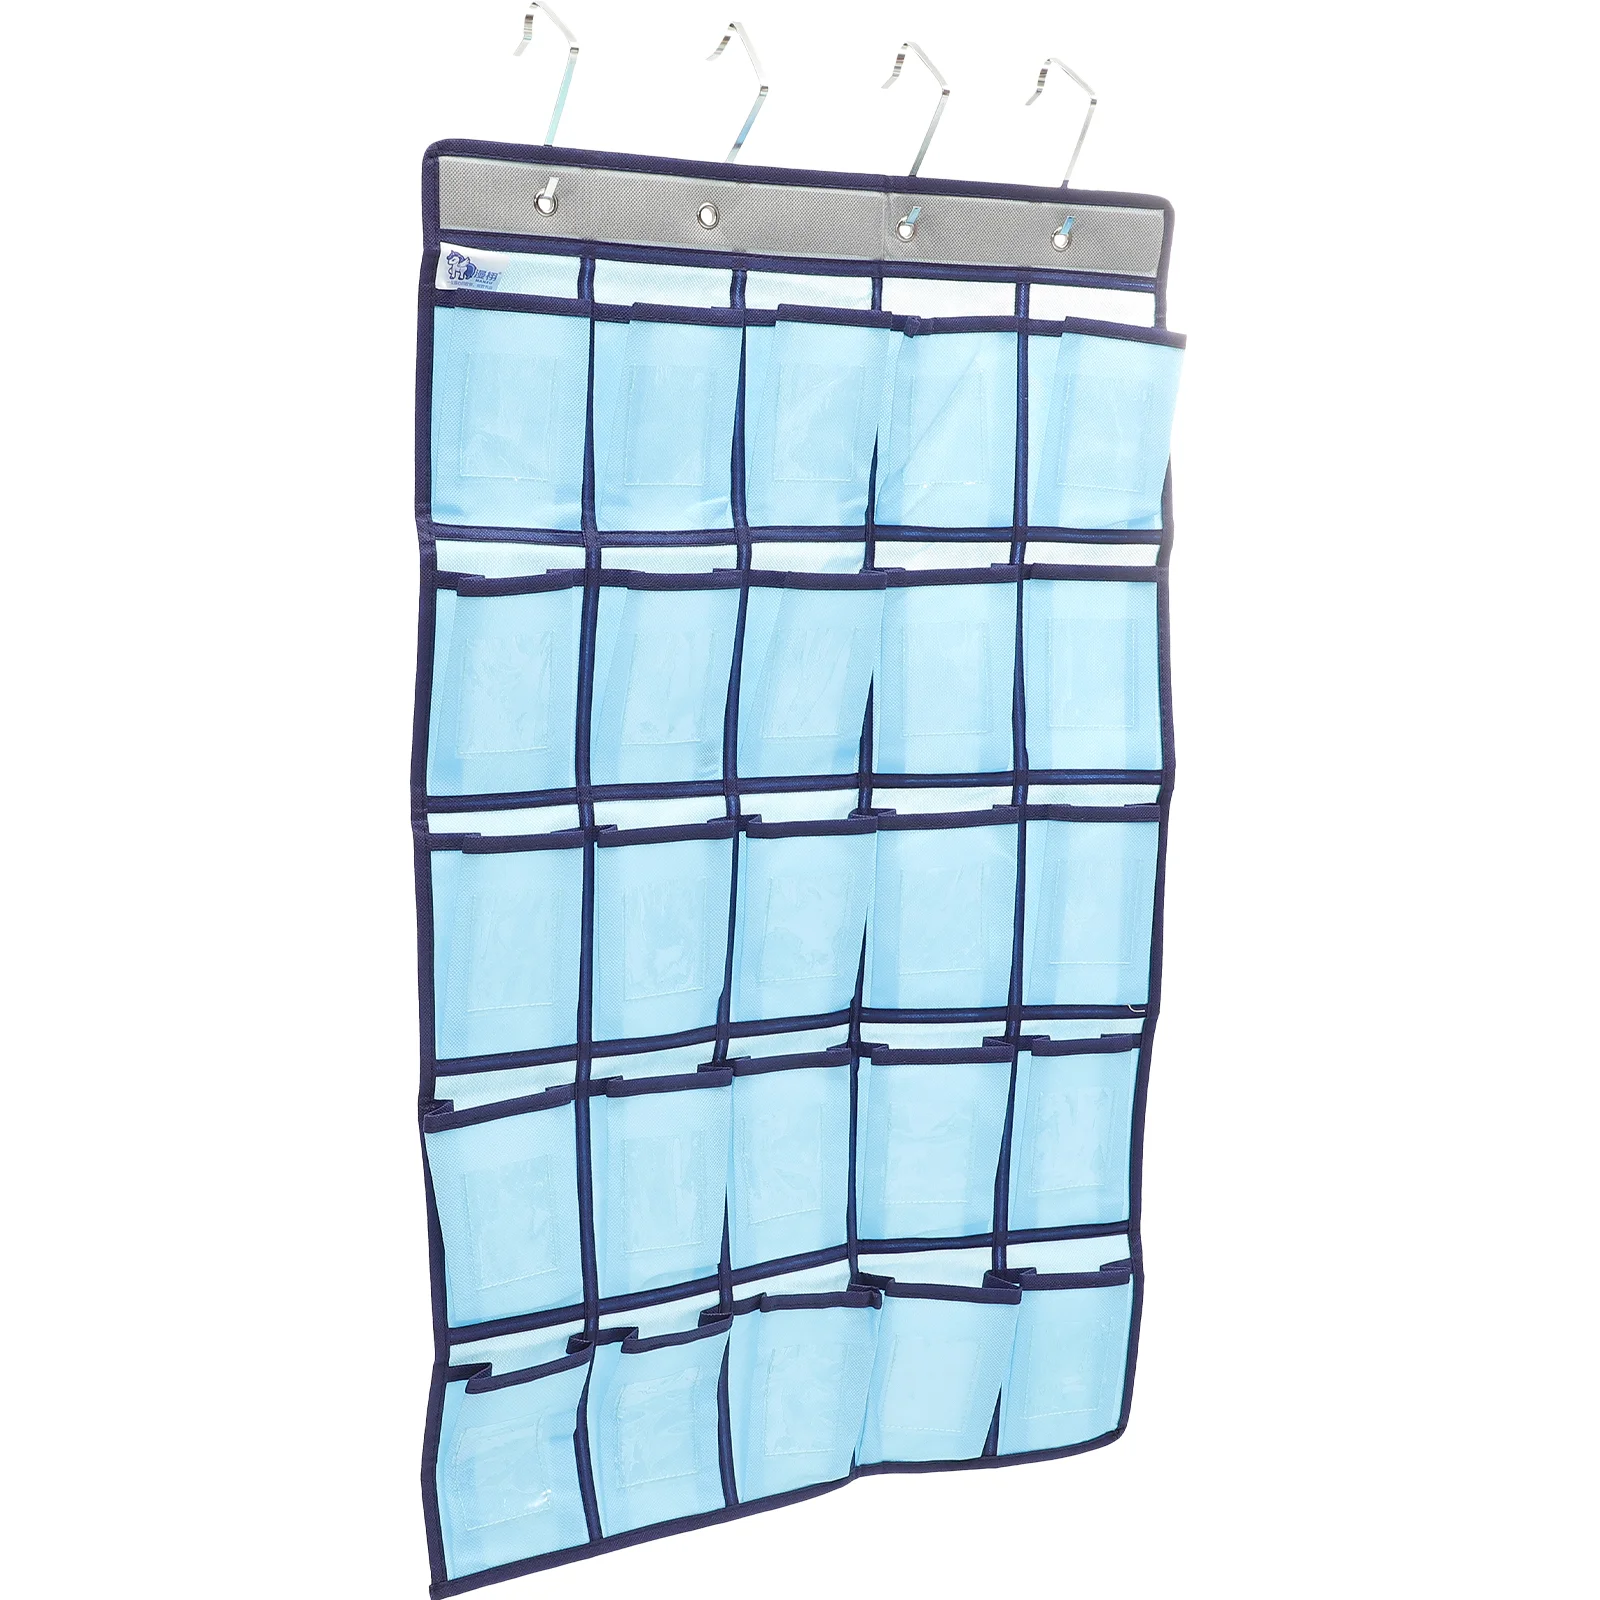 

Telephone Hanging Holder Pocket Chart Classroom Storage Bag Mobile Calculator Non-woven Fabric Organizer Cell Wall Pouch